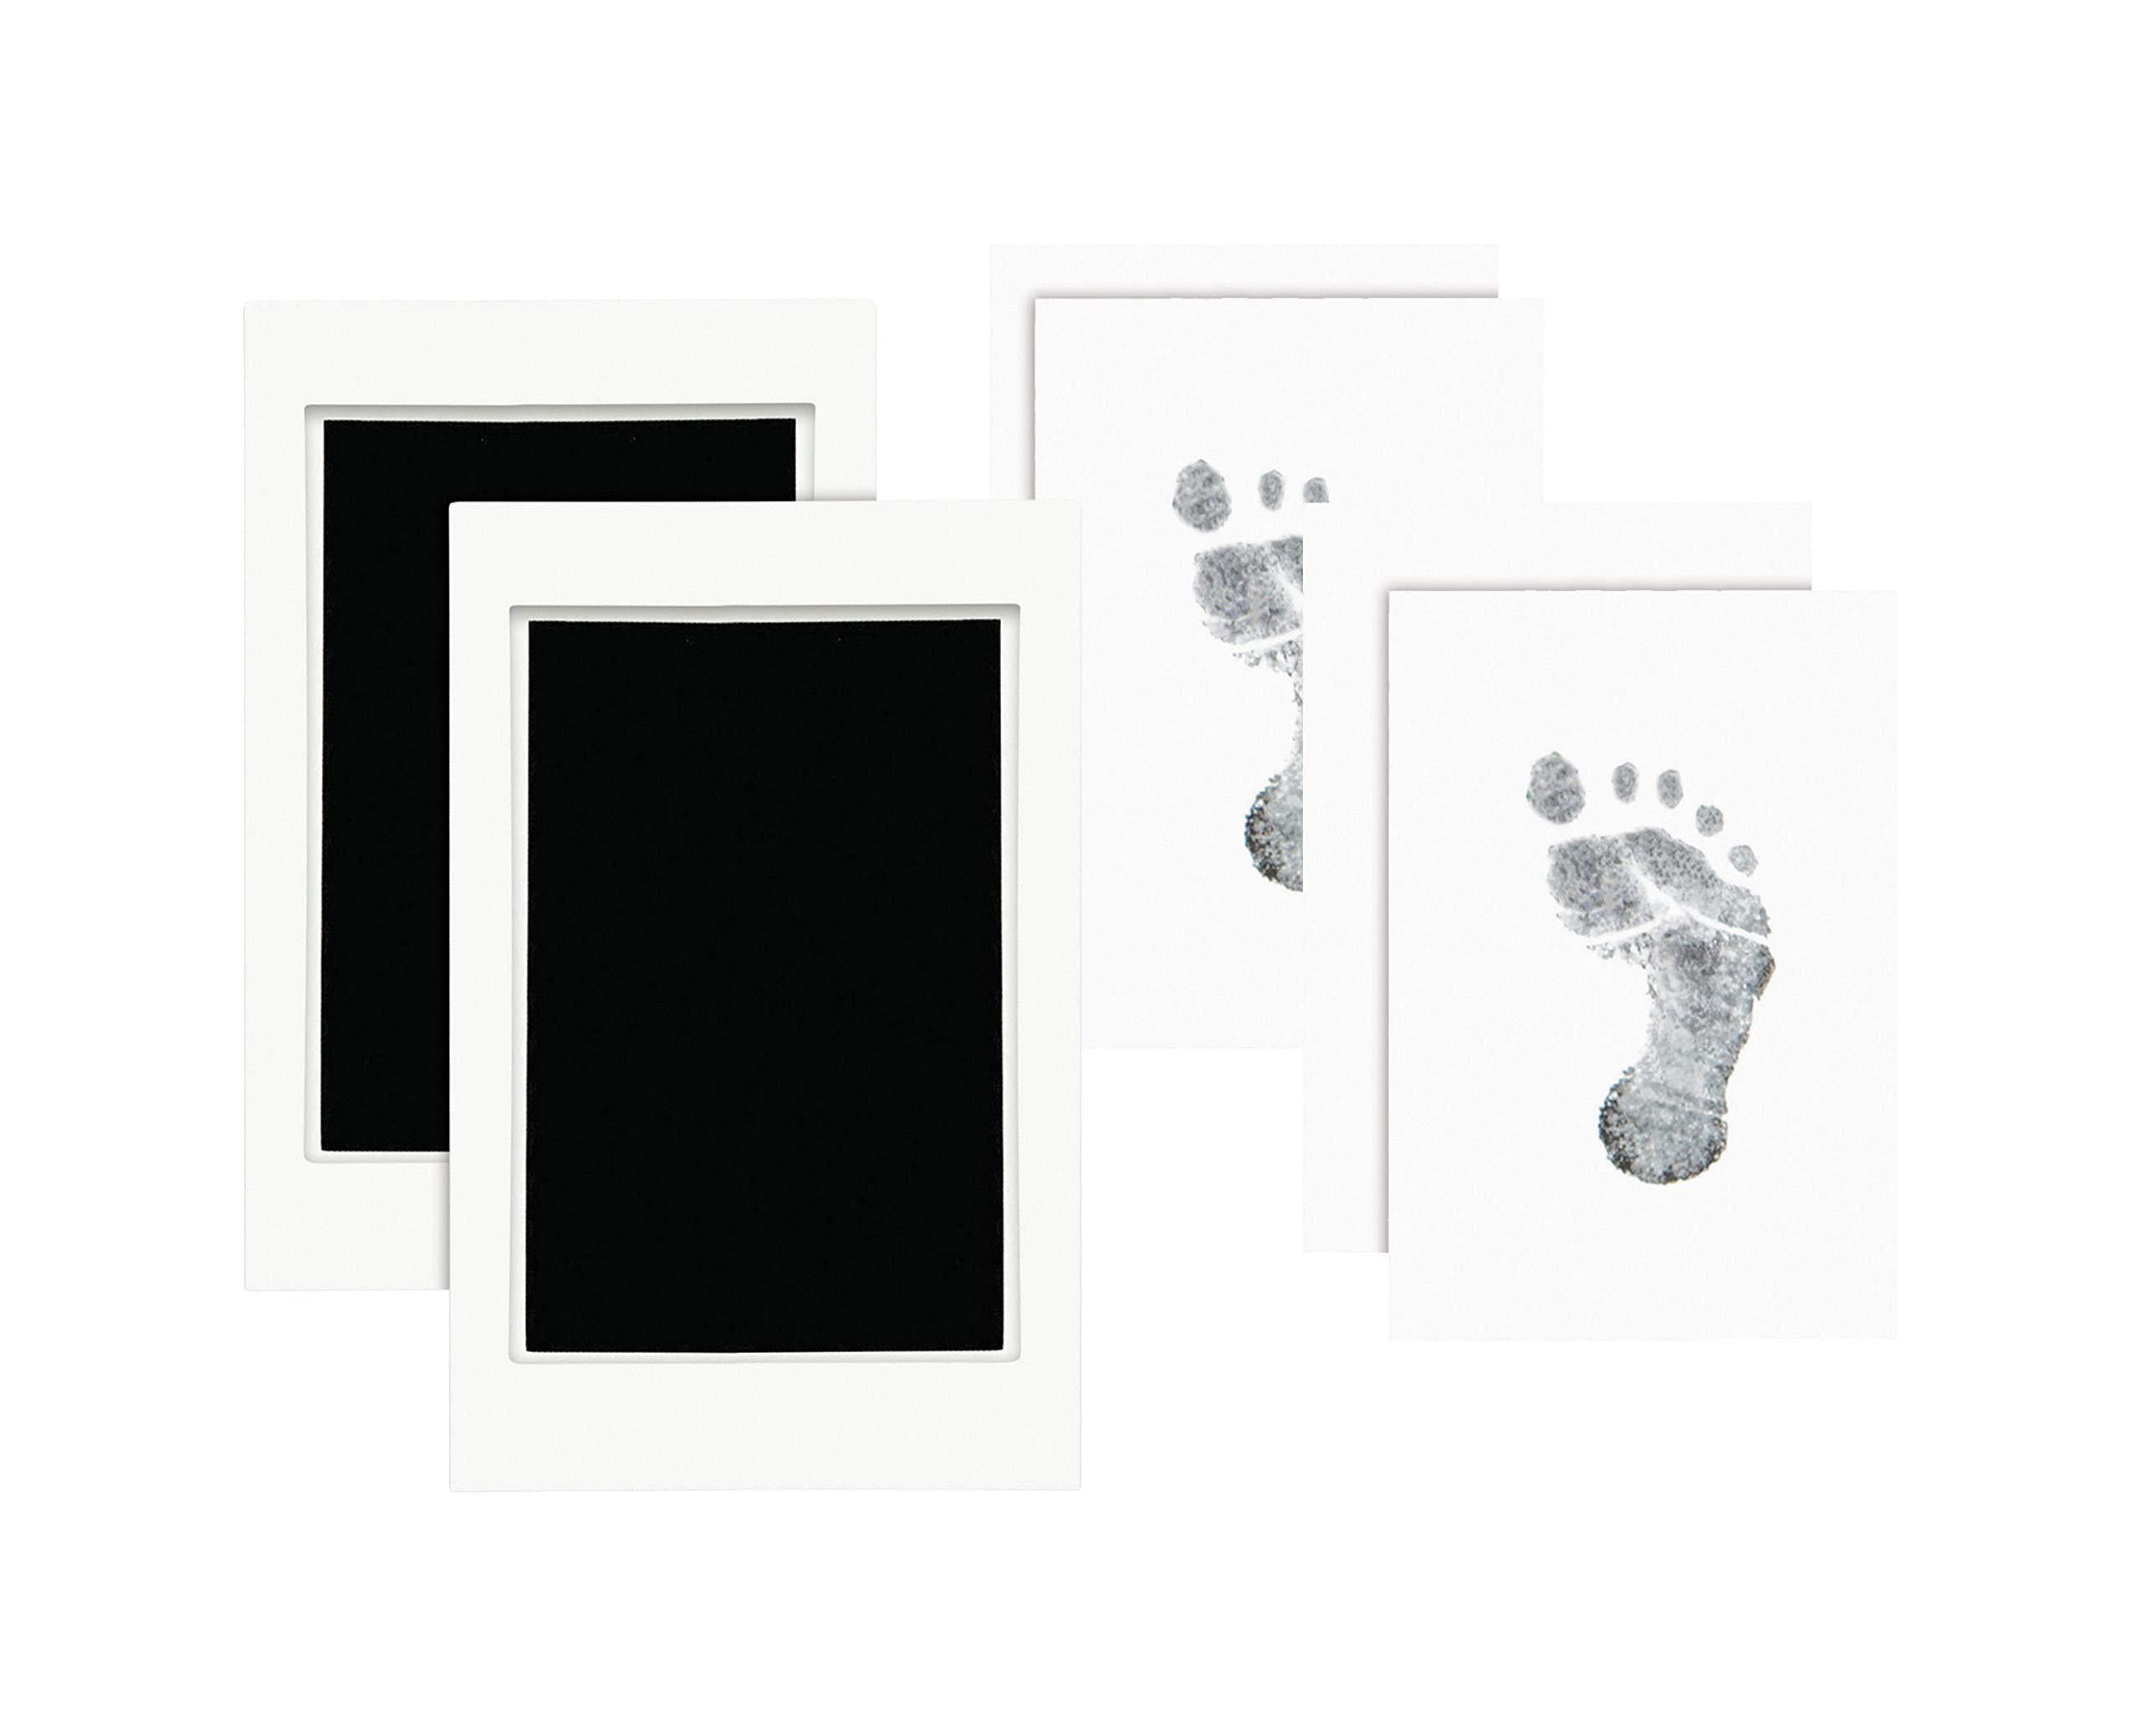 Xingwenice Baby Clean Touch Ink Pad for Newborn Footprint